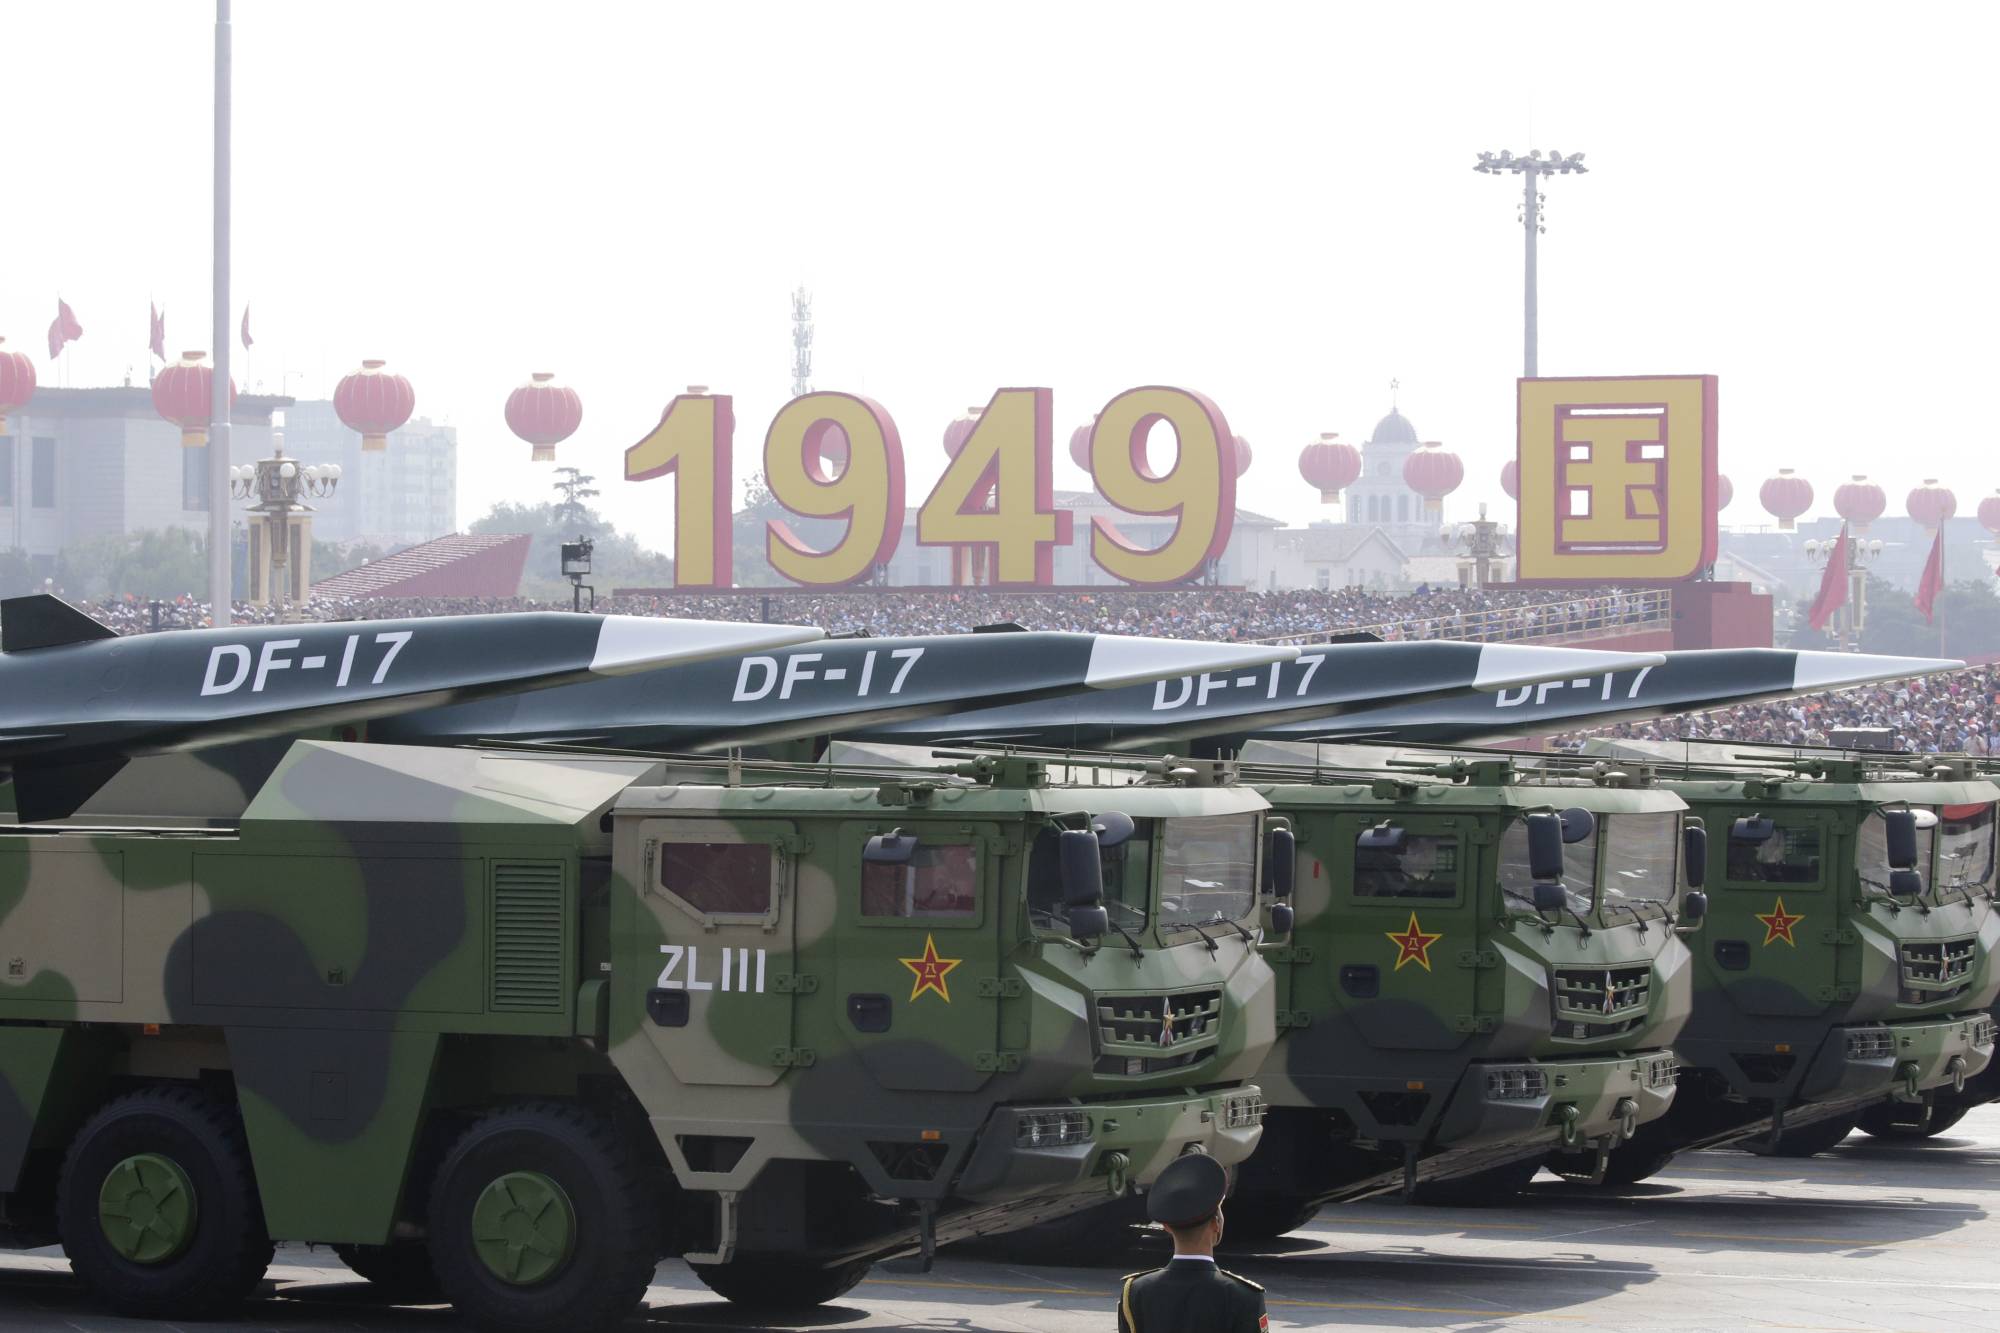 Chinese military vehicles carrying DF-17 hypersonic missiles travel past Beijing's Tiananmen Square during a military parade marking the 70th founding anniversary of the People's Republic of China, on Oct. 1, 2019.  | REUTERS